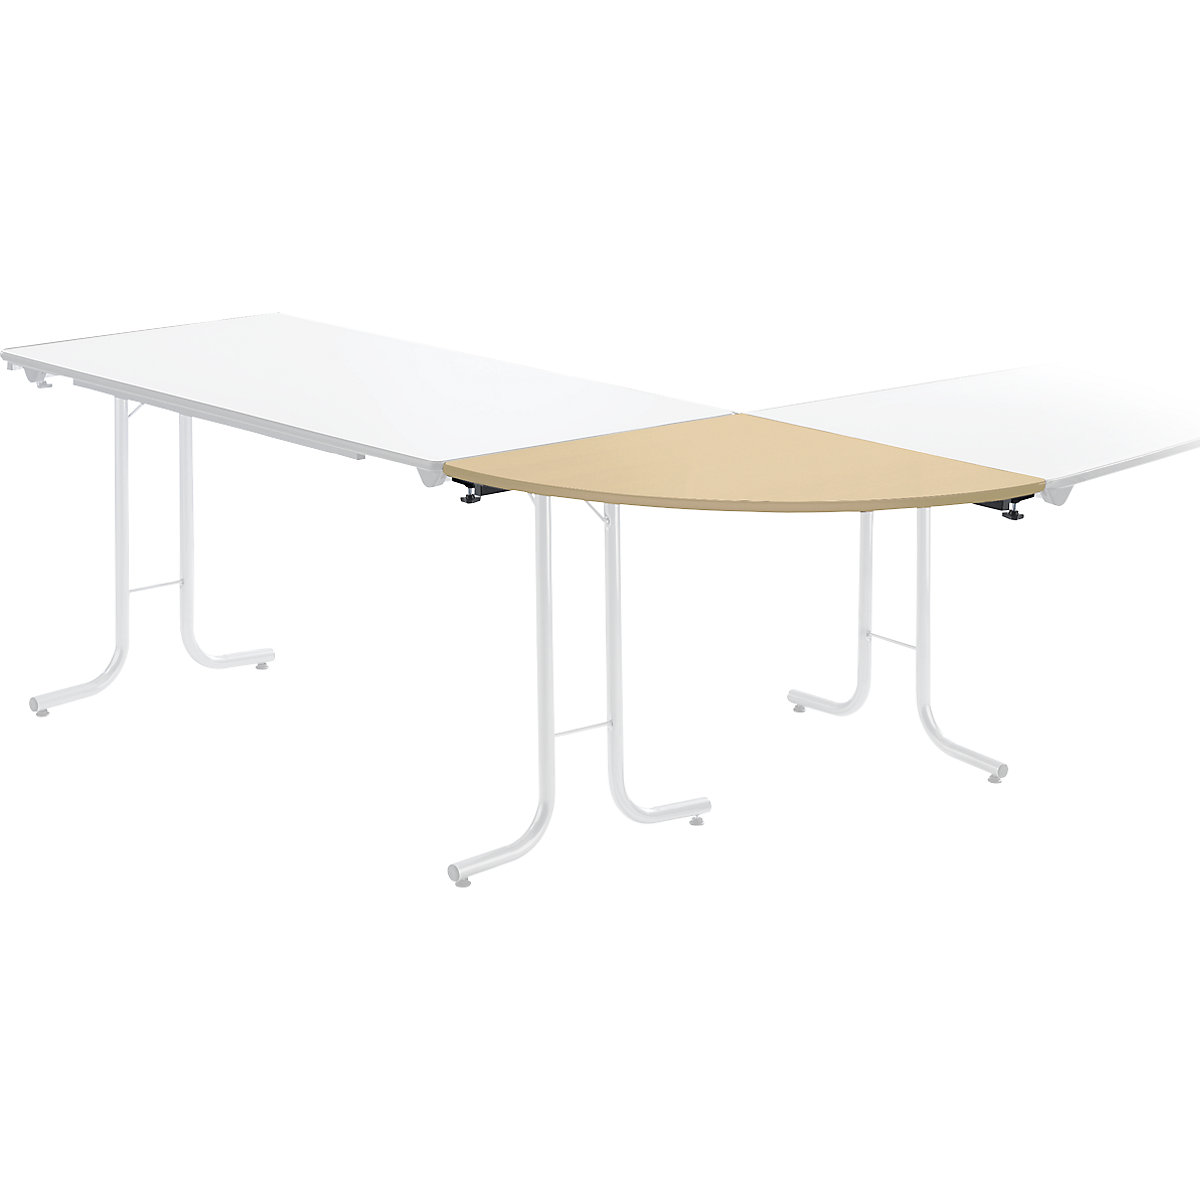 Extension table for folding table, quarter circle top, 700 x 700 mm, black frame, maple finish tabletop-4